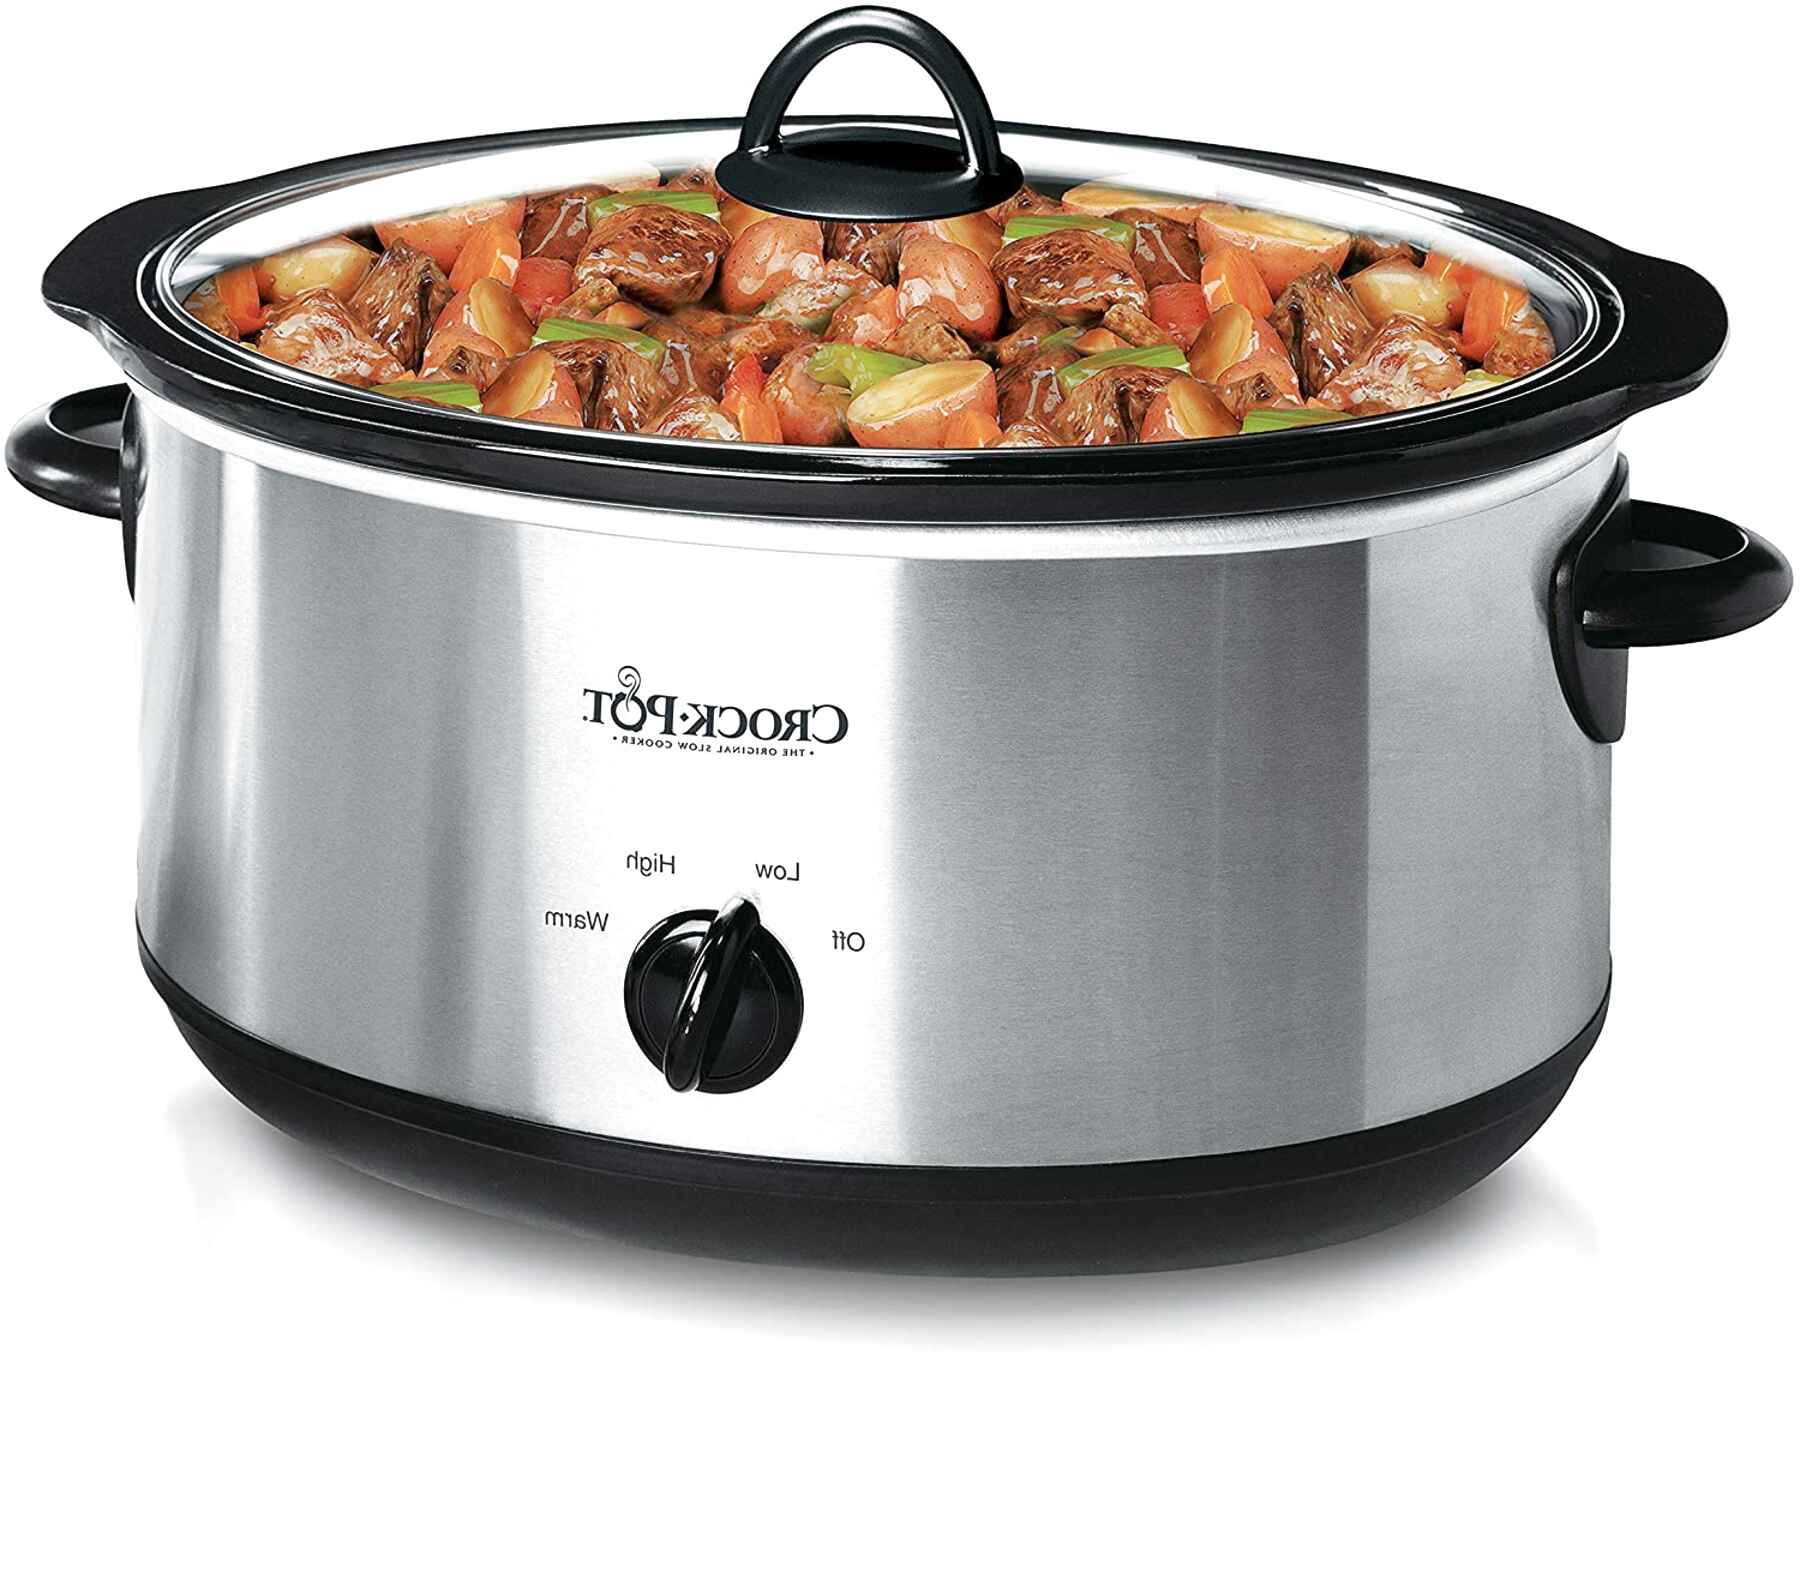 Crock Pot Slow Cooker for sale in UK | 85 used Crock Pot Slow Cookers